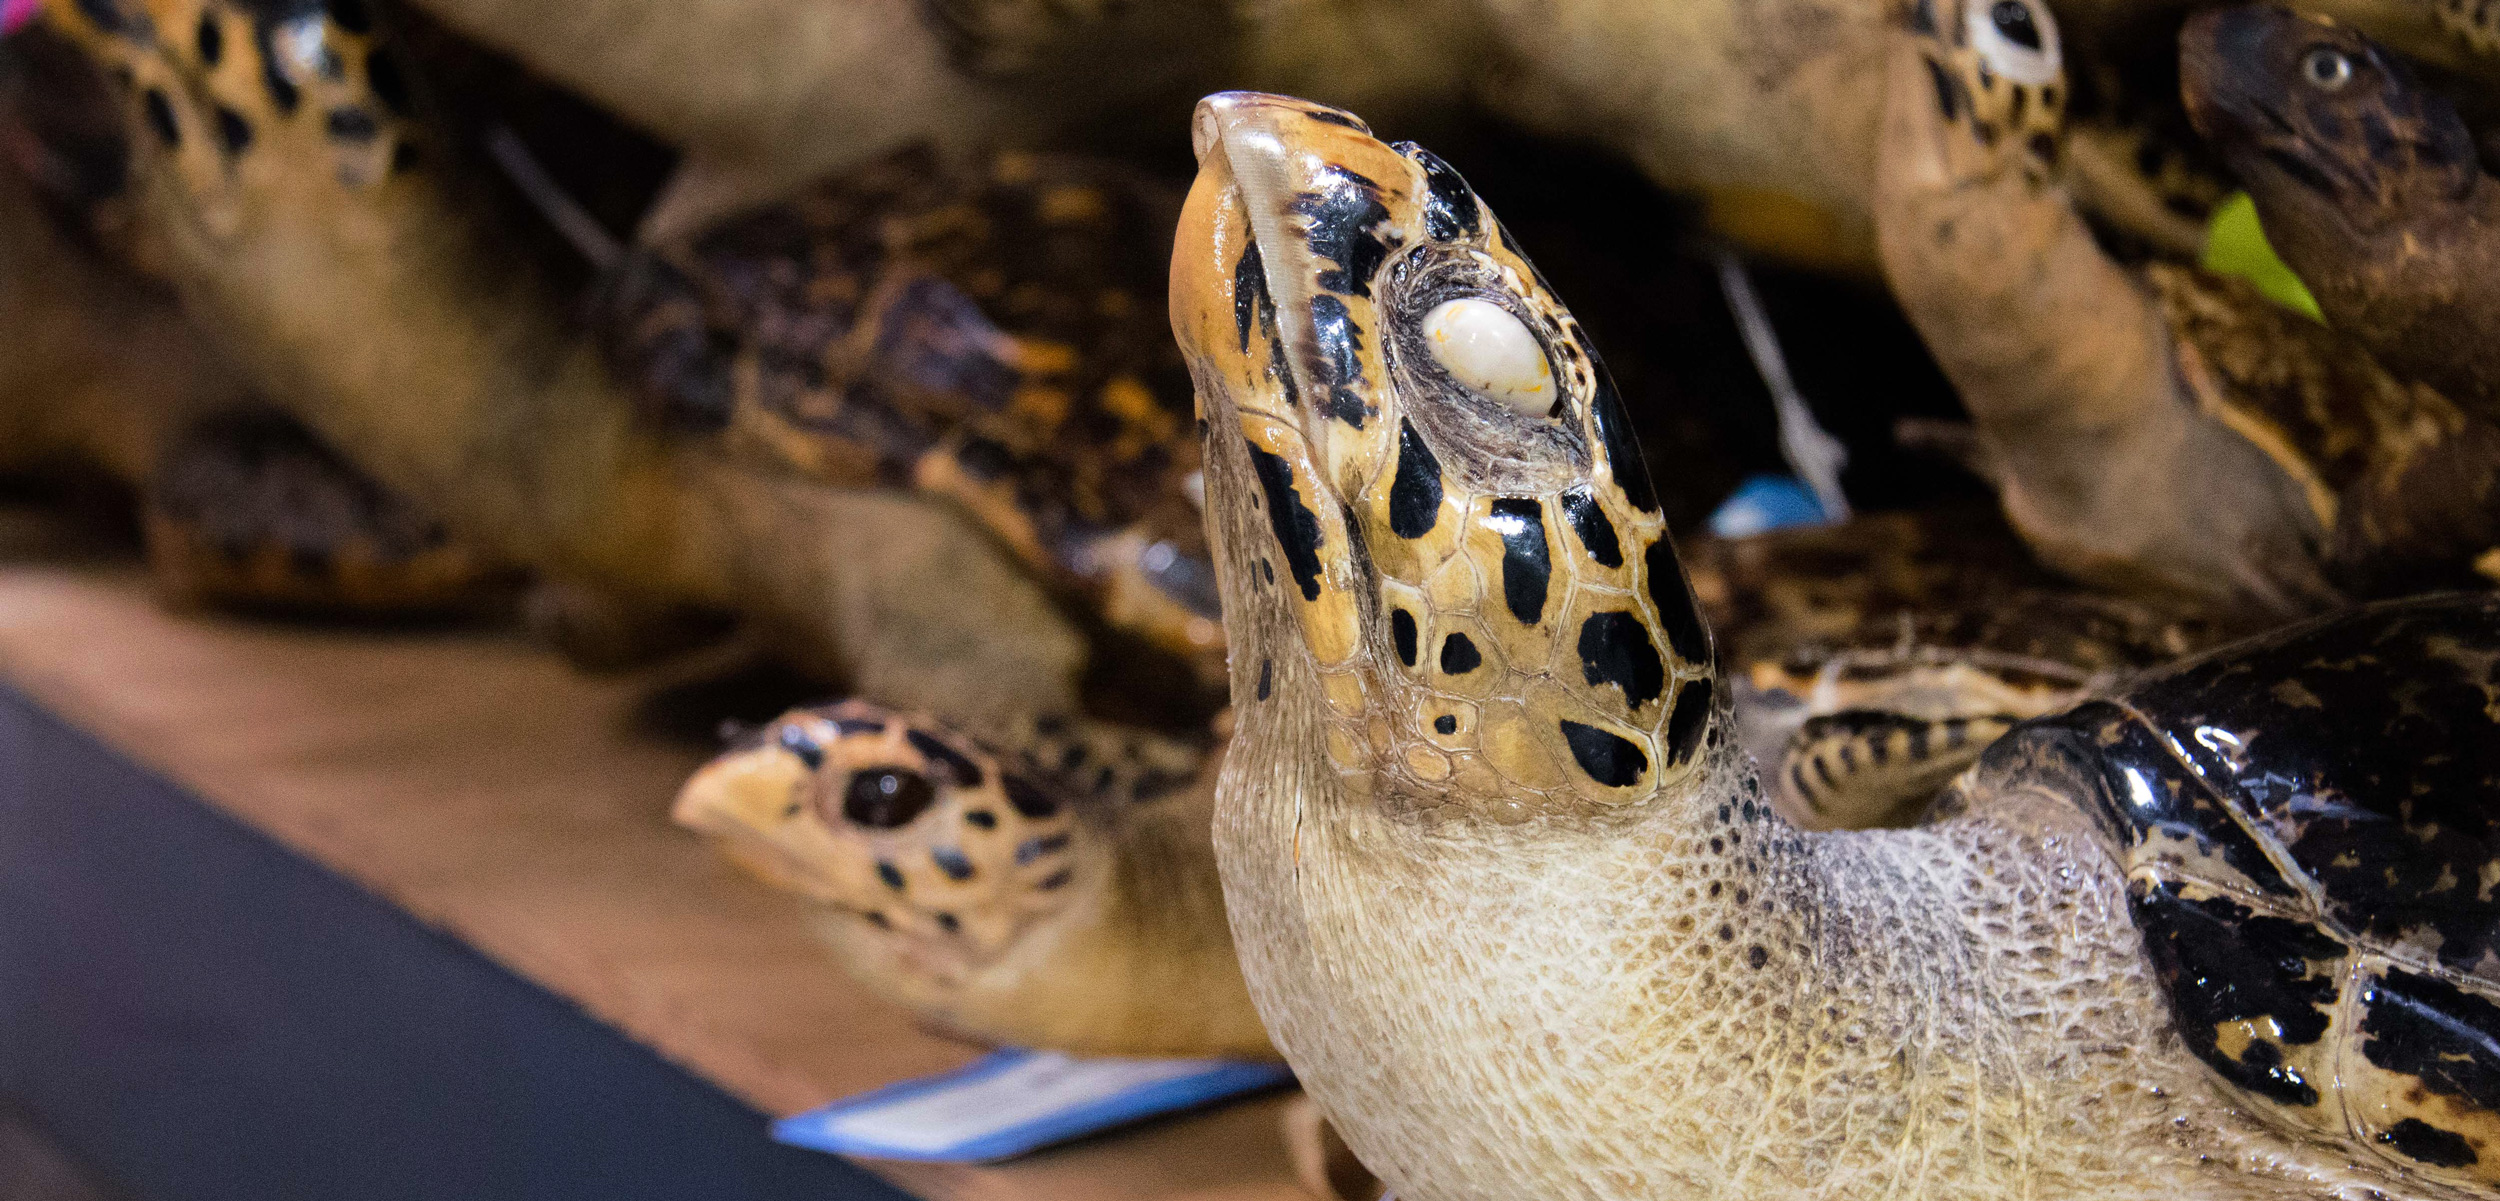 Mounted hawksbill sea turtles are among the many coastal wildlife products housed at the National Wildlife Property Repository near Denver, Colorado. The critically endangered turtles are often poached from the wild for their meat, skin, and shells. Photo by Gloria Dickie